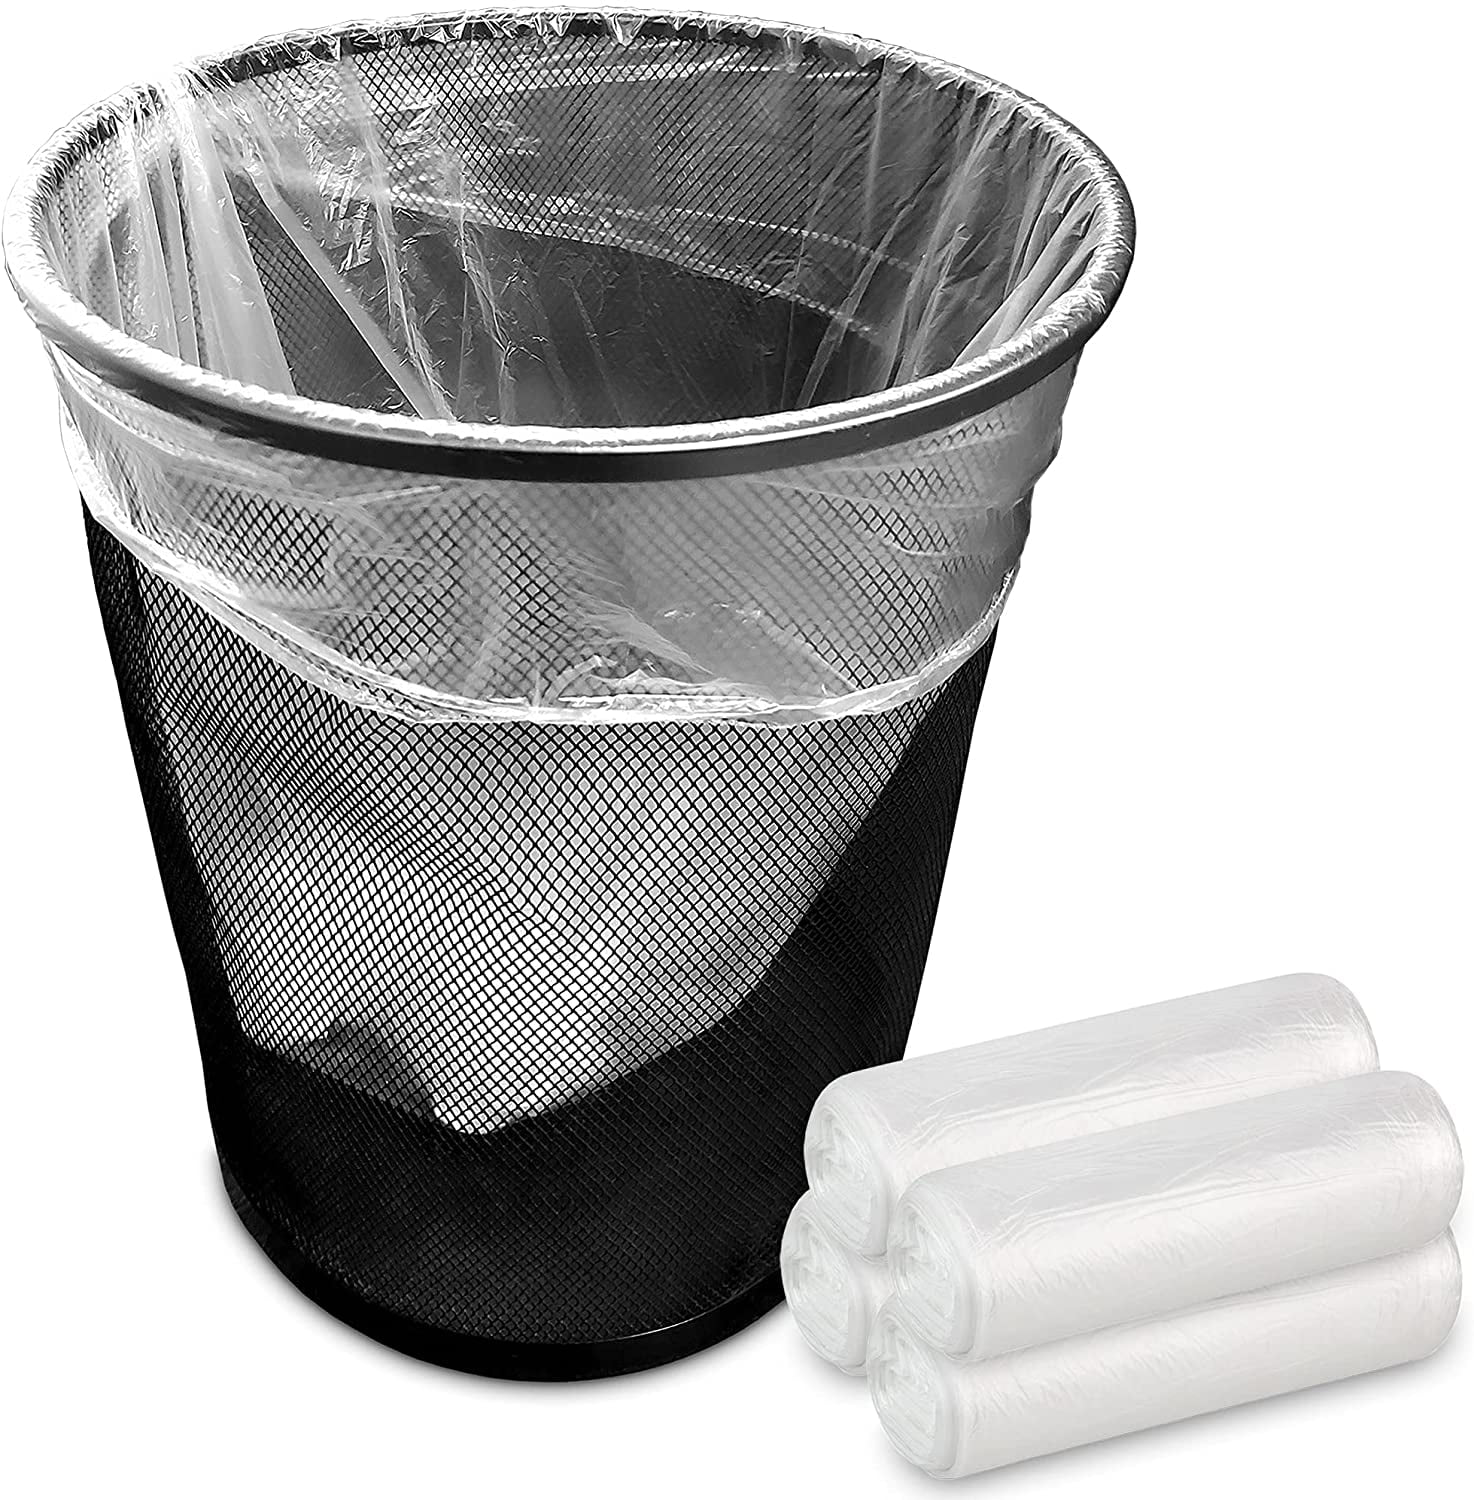 Details about   Multipurpose Trash Bags Drawstring 30 Gallon 50 Count Plastic Garbage Container 